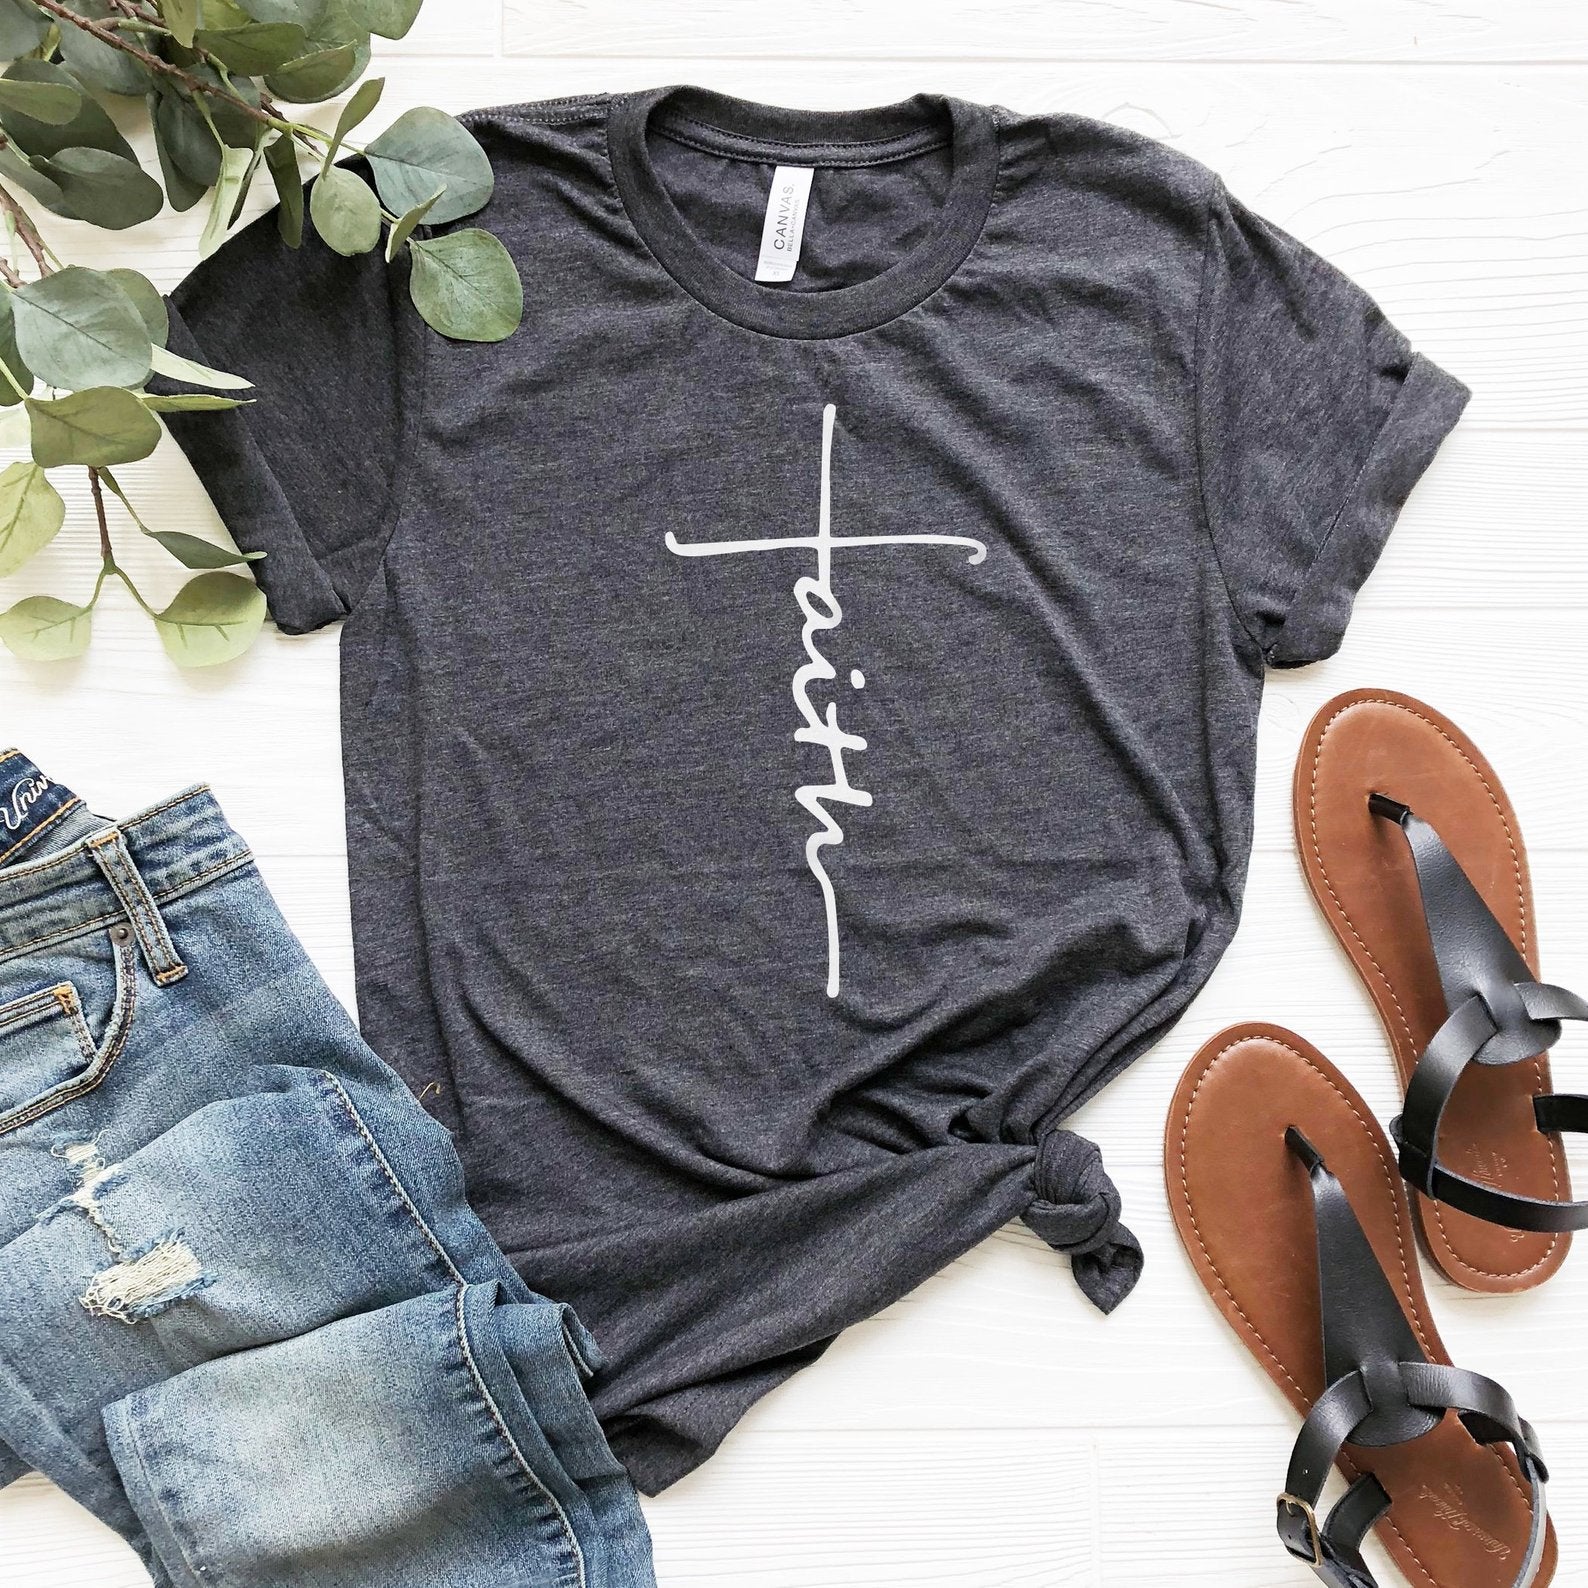 Lift His Name On High With These Fierce Faith-Based T-Shirts